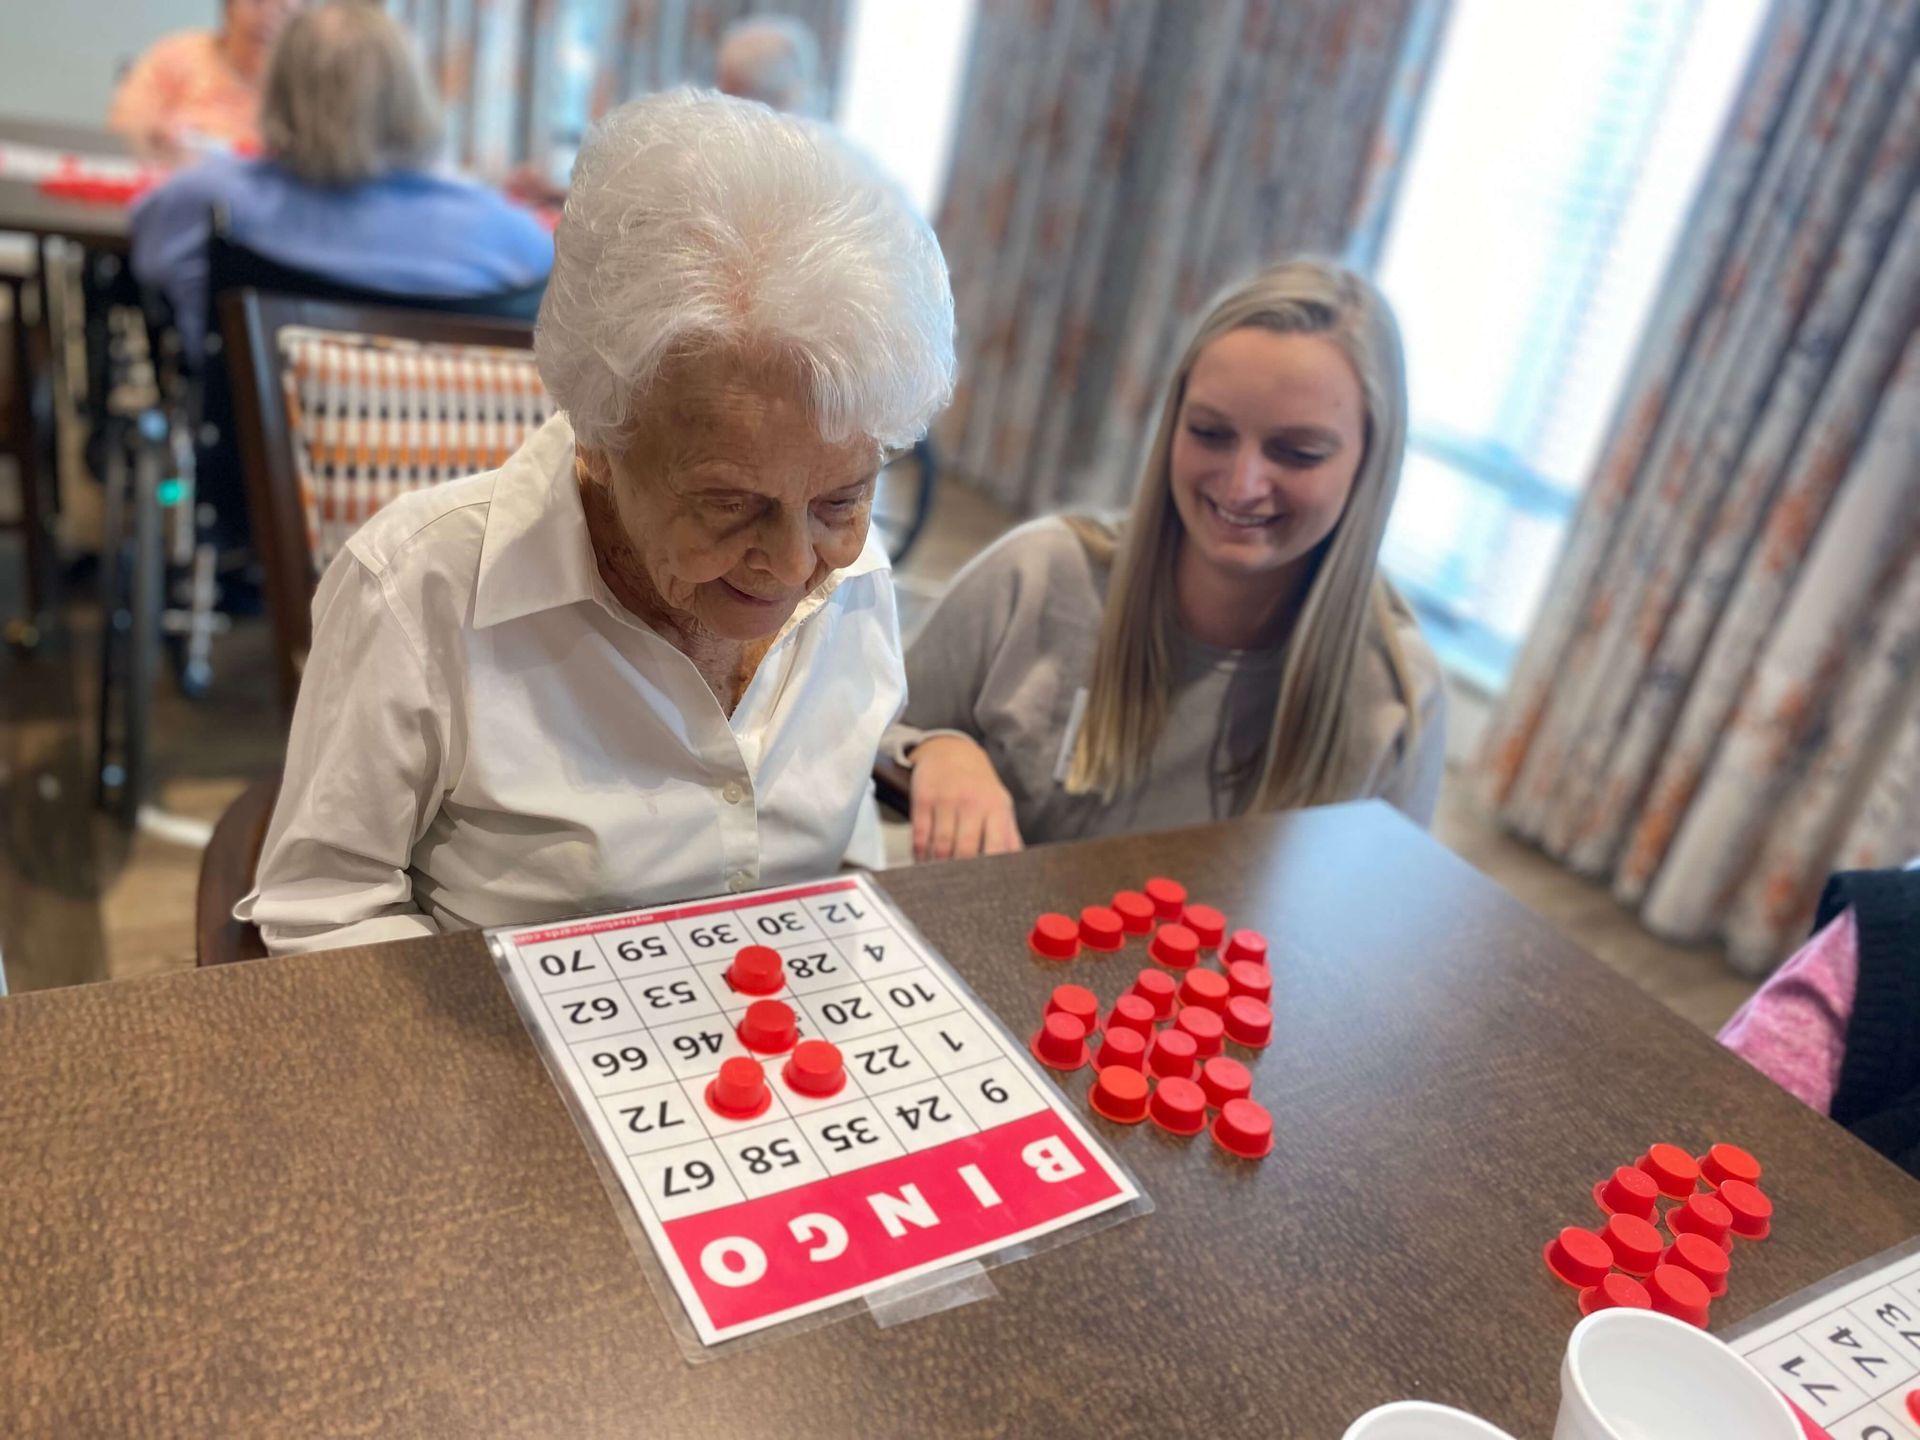 nursing home administrator assisting resident as they play bingo